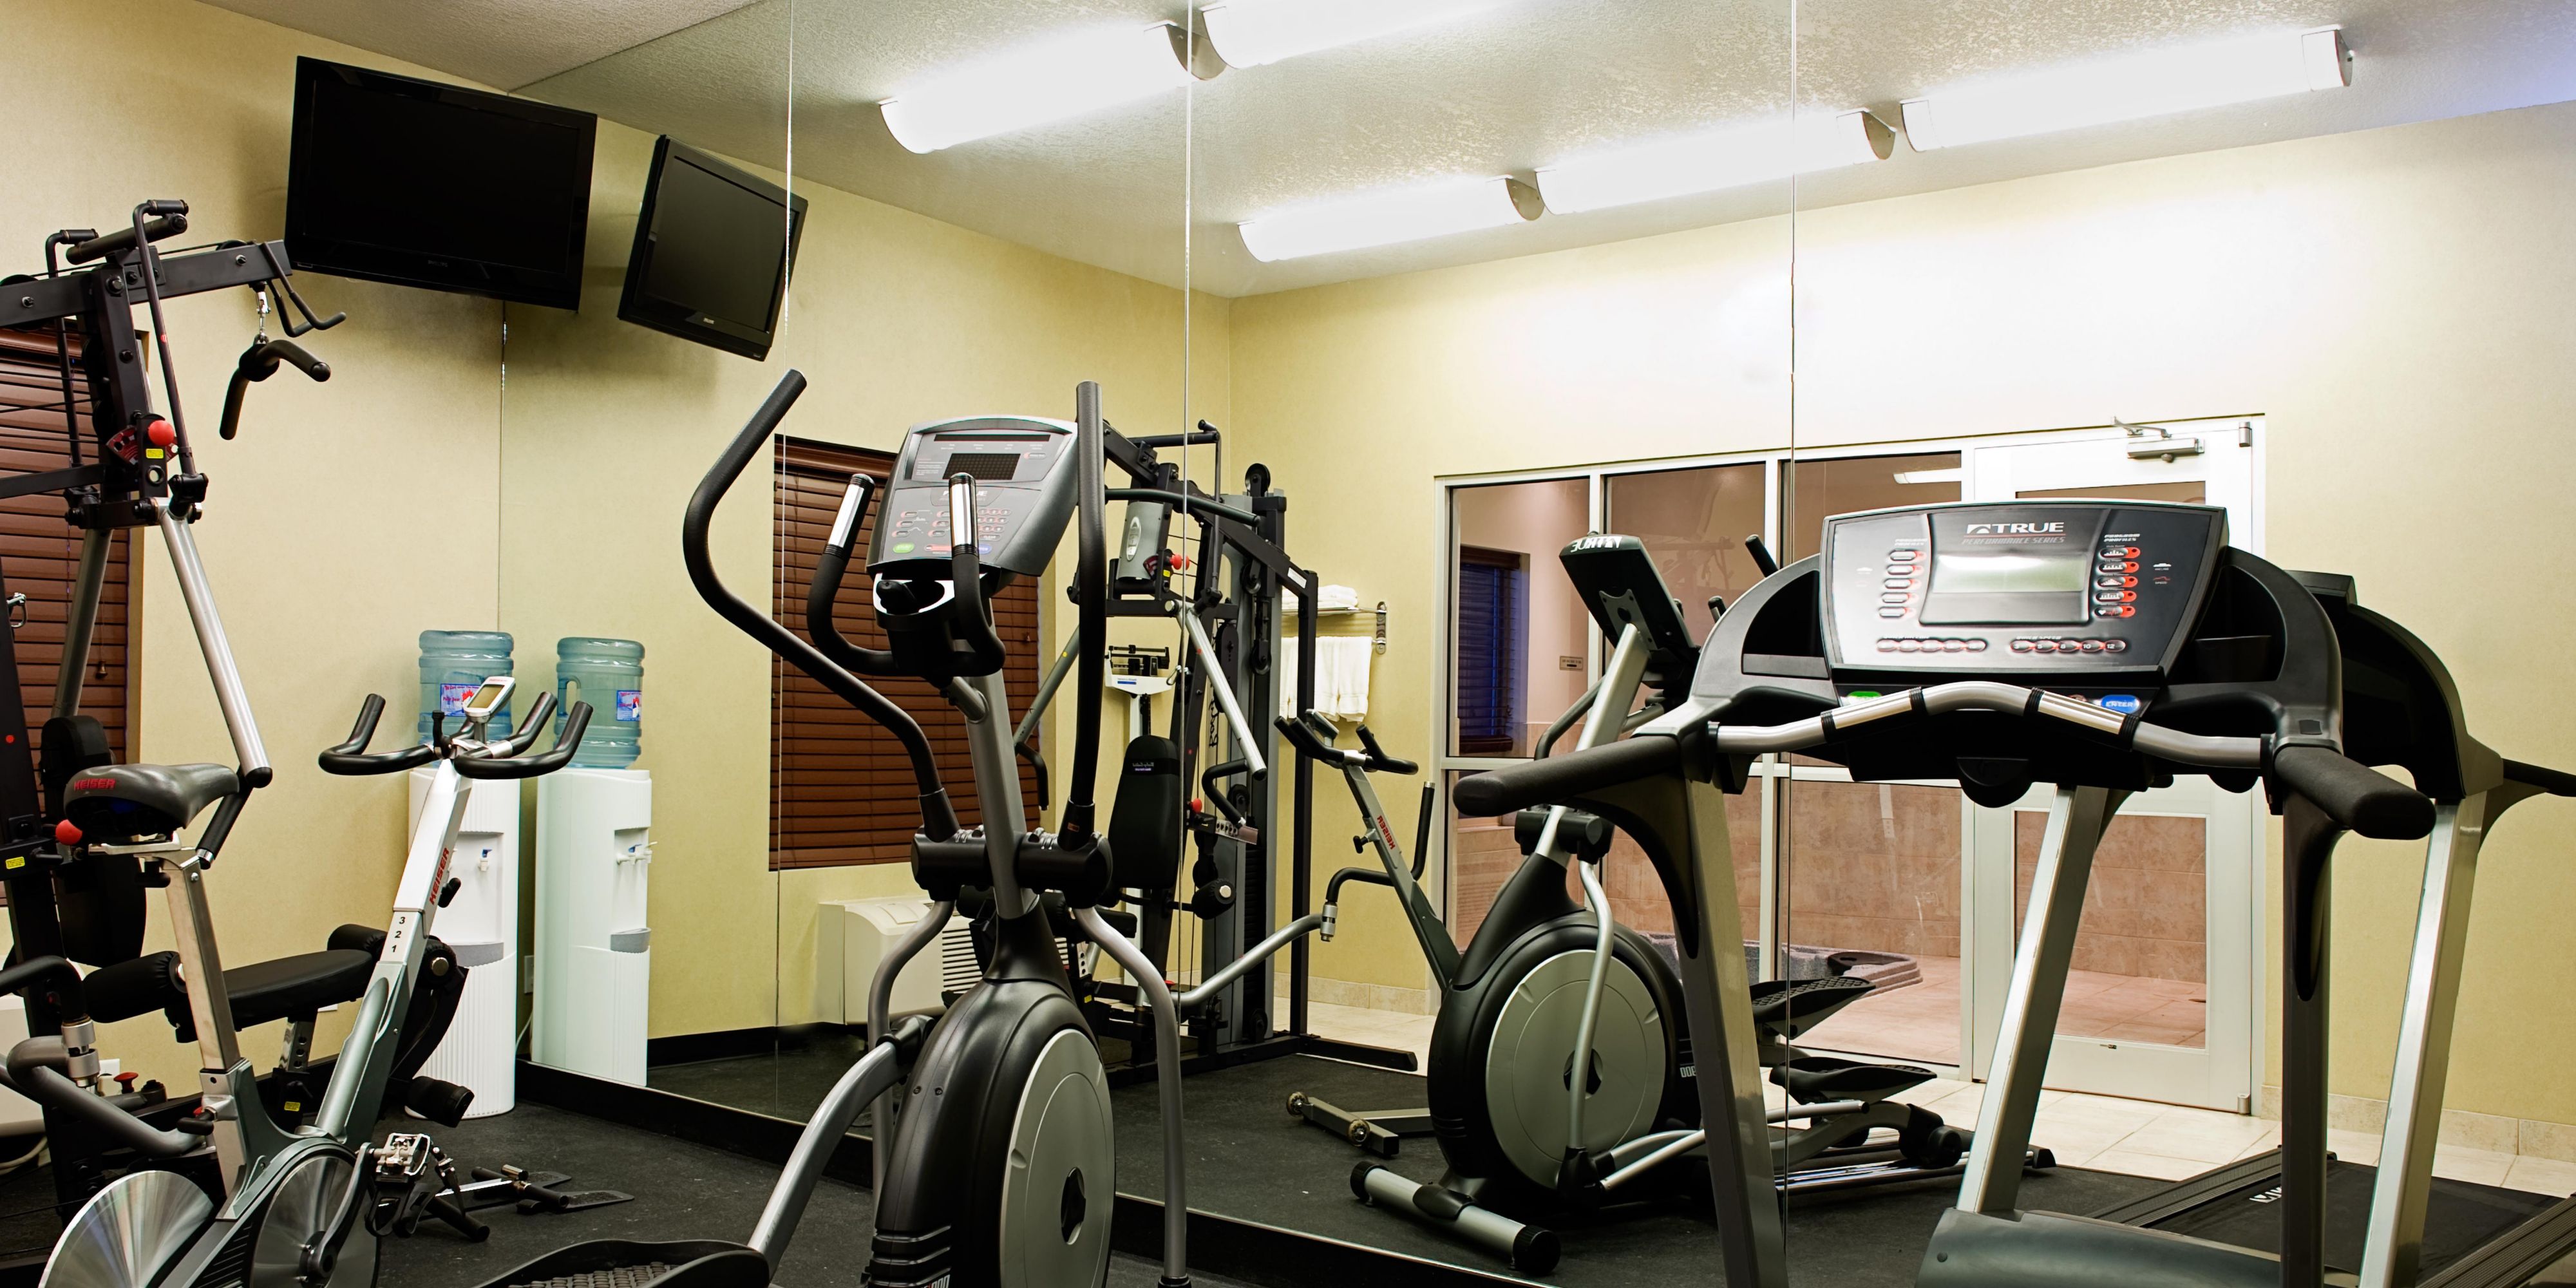 Looking to break a sweat? Come and check out our Fitness Centre. We offer a variety of machines such as Bowflex, treadmill, exercise bike and elliptical, as well as free weights.